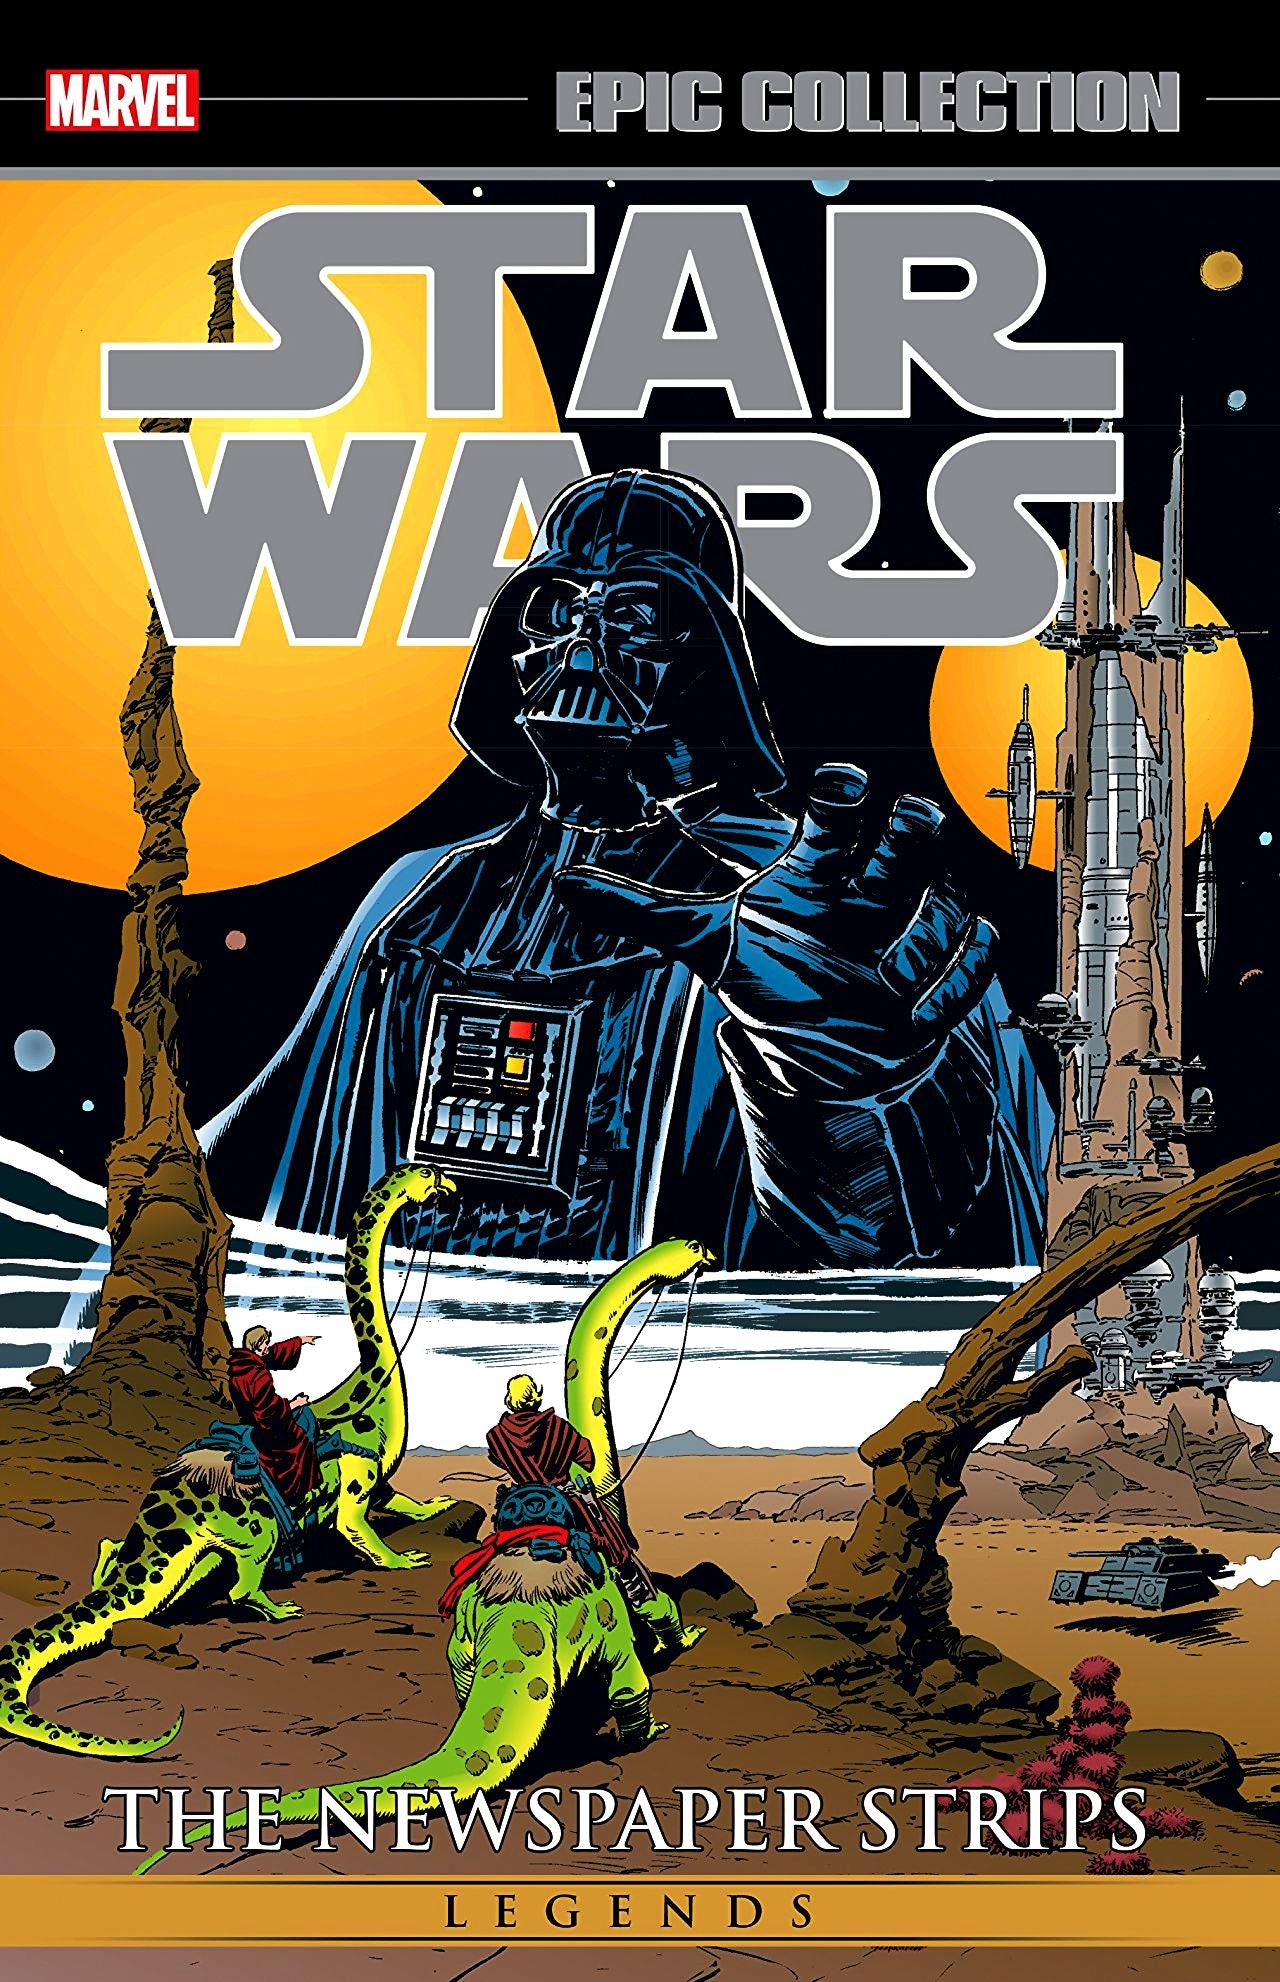 Star Wars Legends: The Newspaper Strips Volume 2 (Epic Collection)